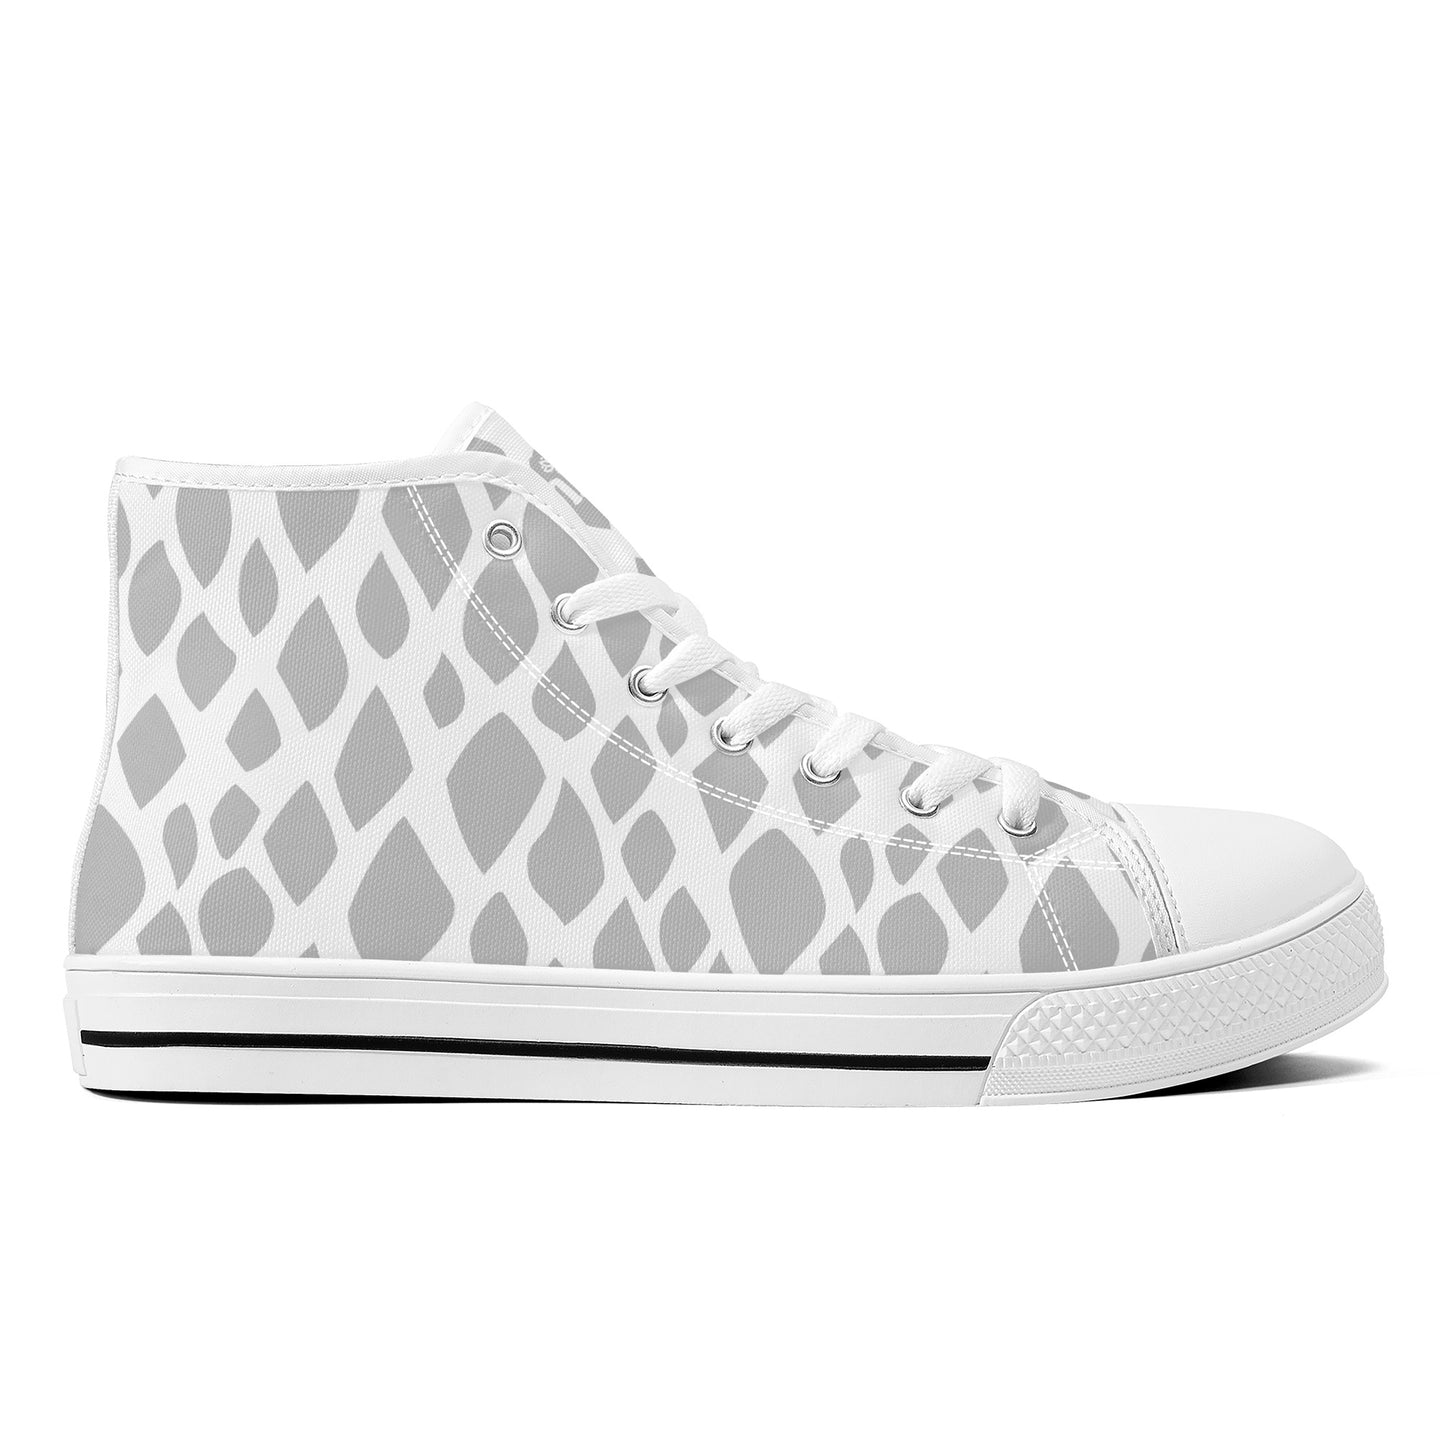 "Nix Snake" High Top Canvas Shoes